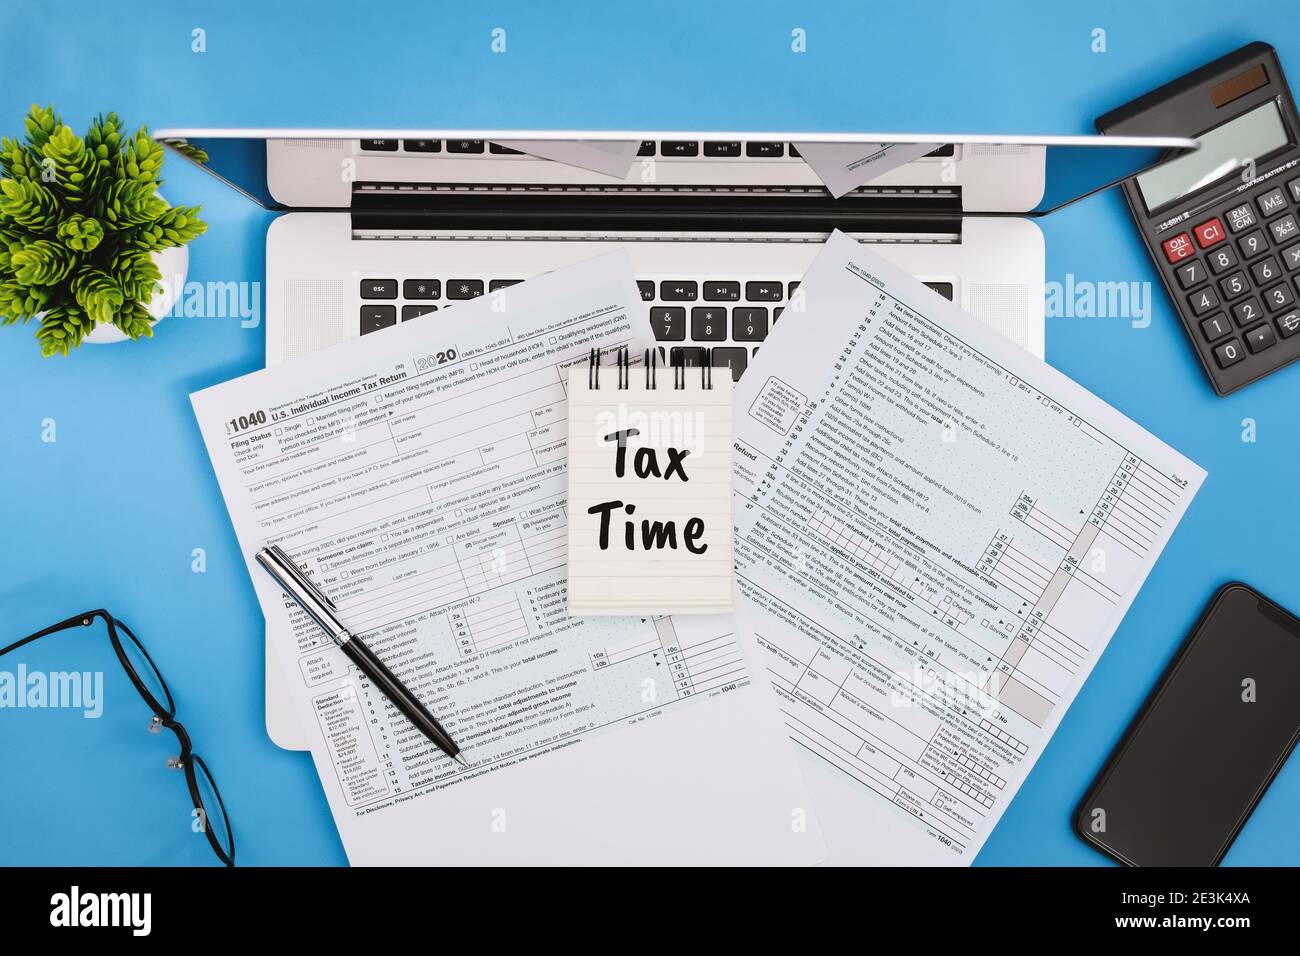 Tax Time. Tax Form 1040 on Office Desk on Light Blue Background Stock Photo